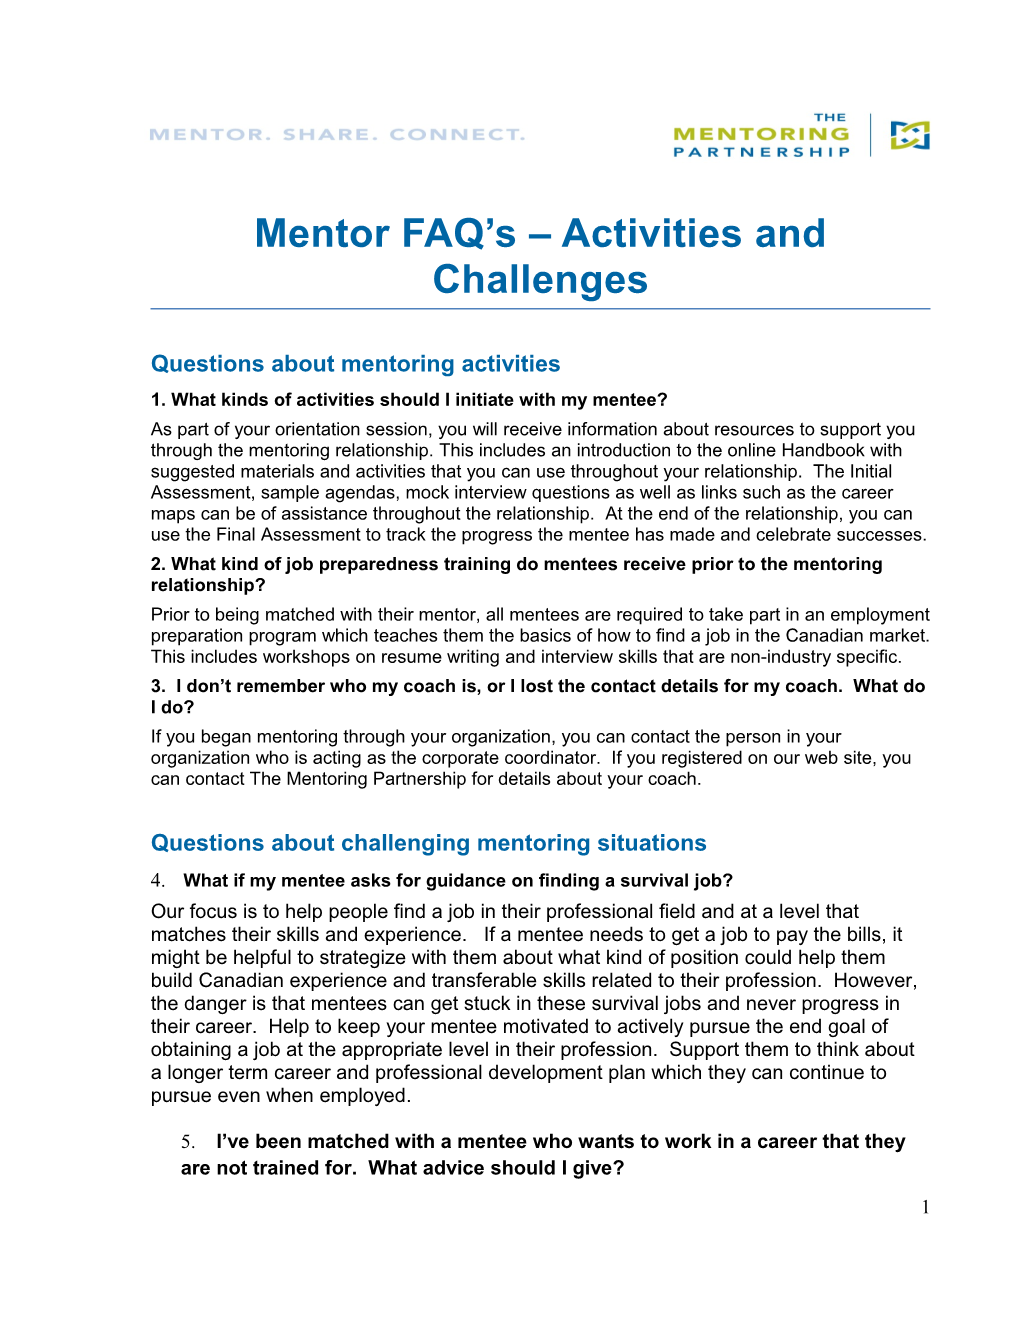 Questions About Mentoring Activities